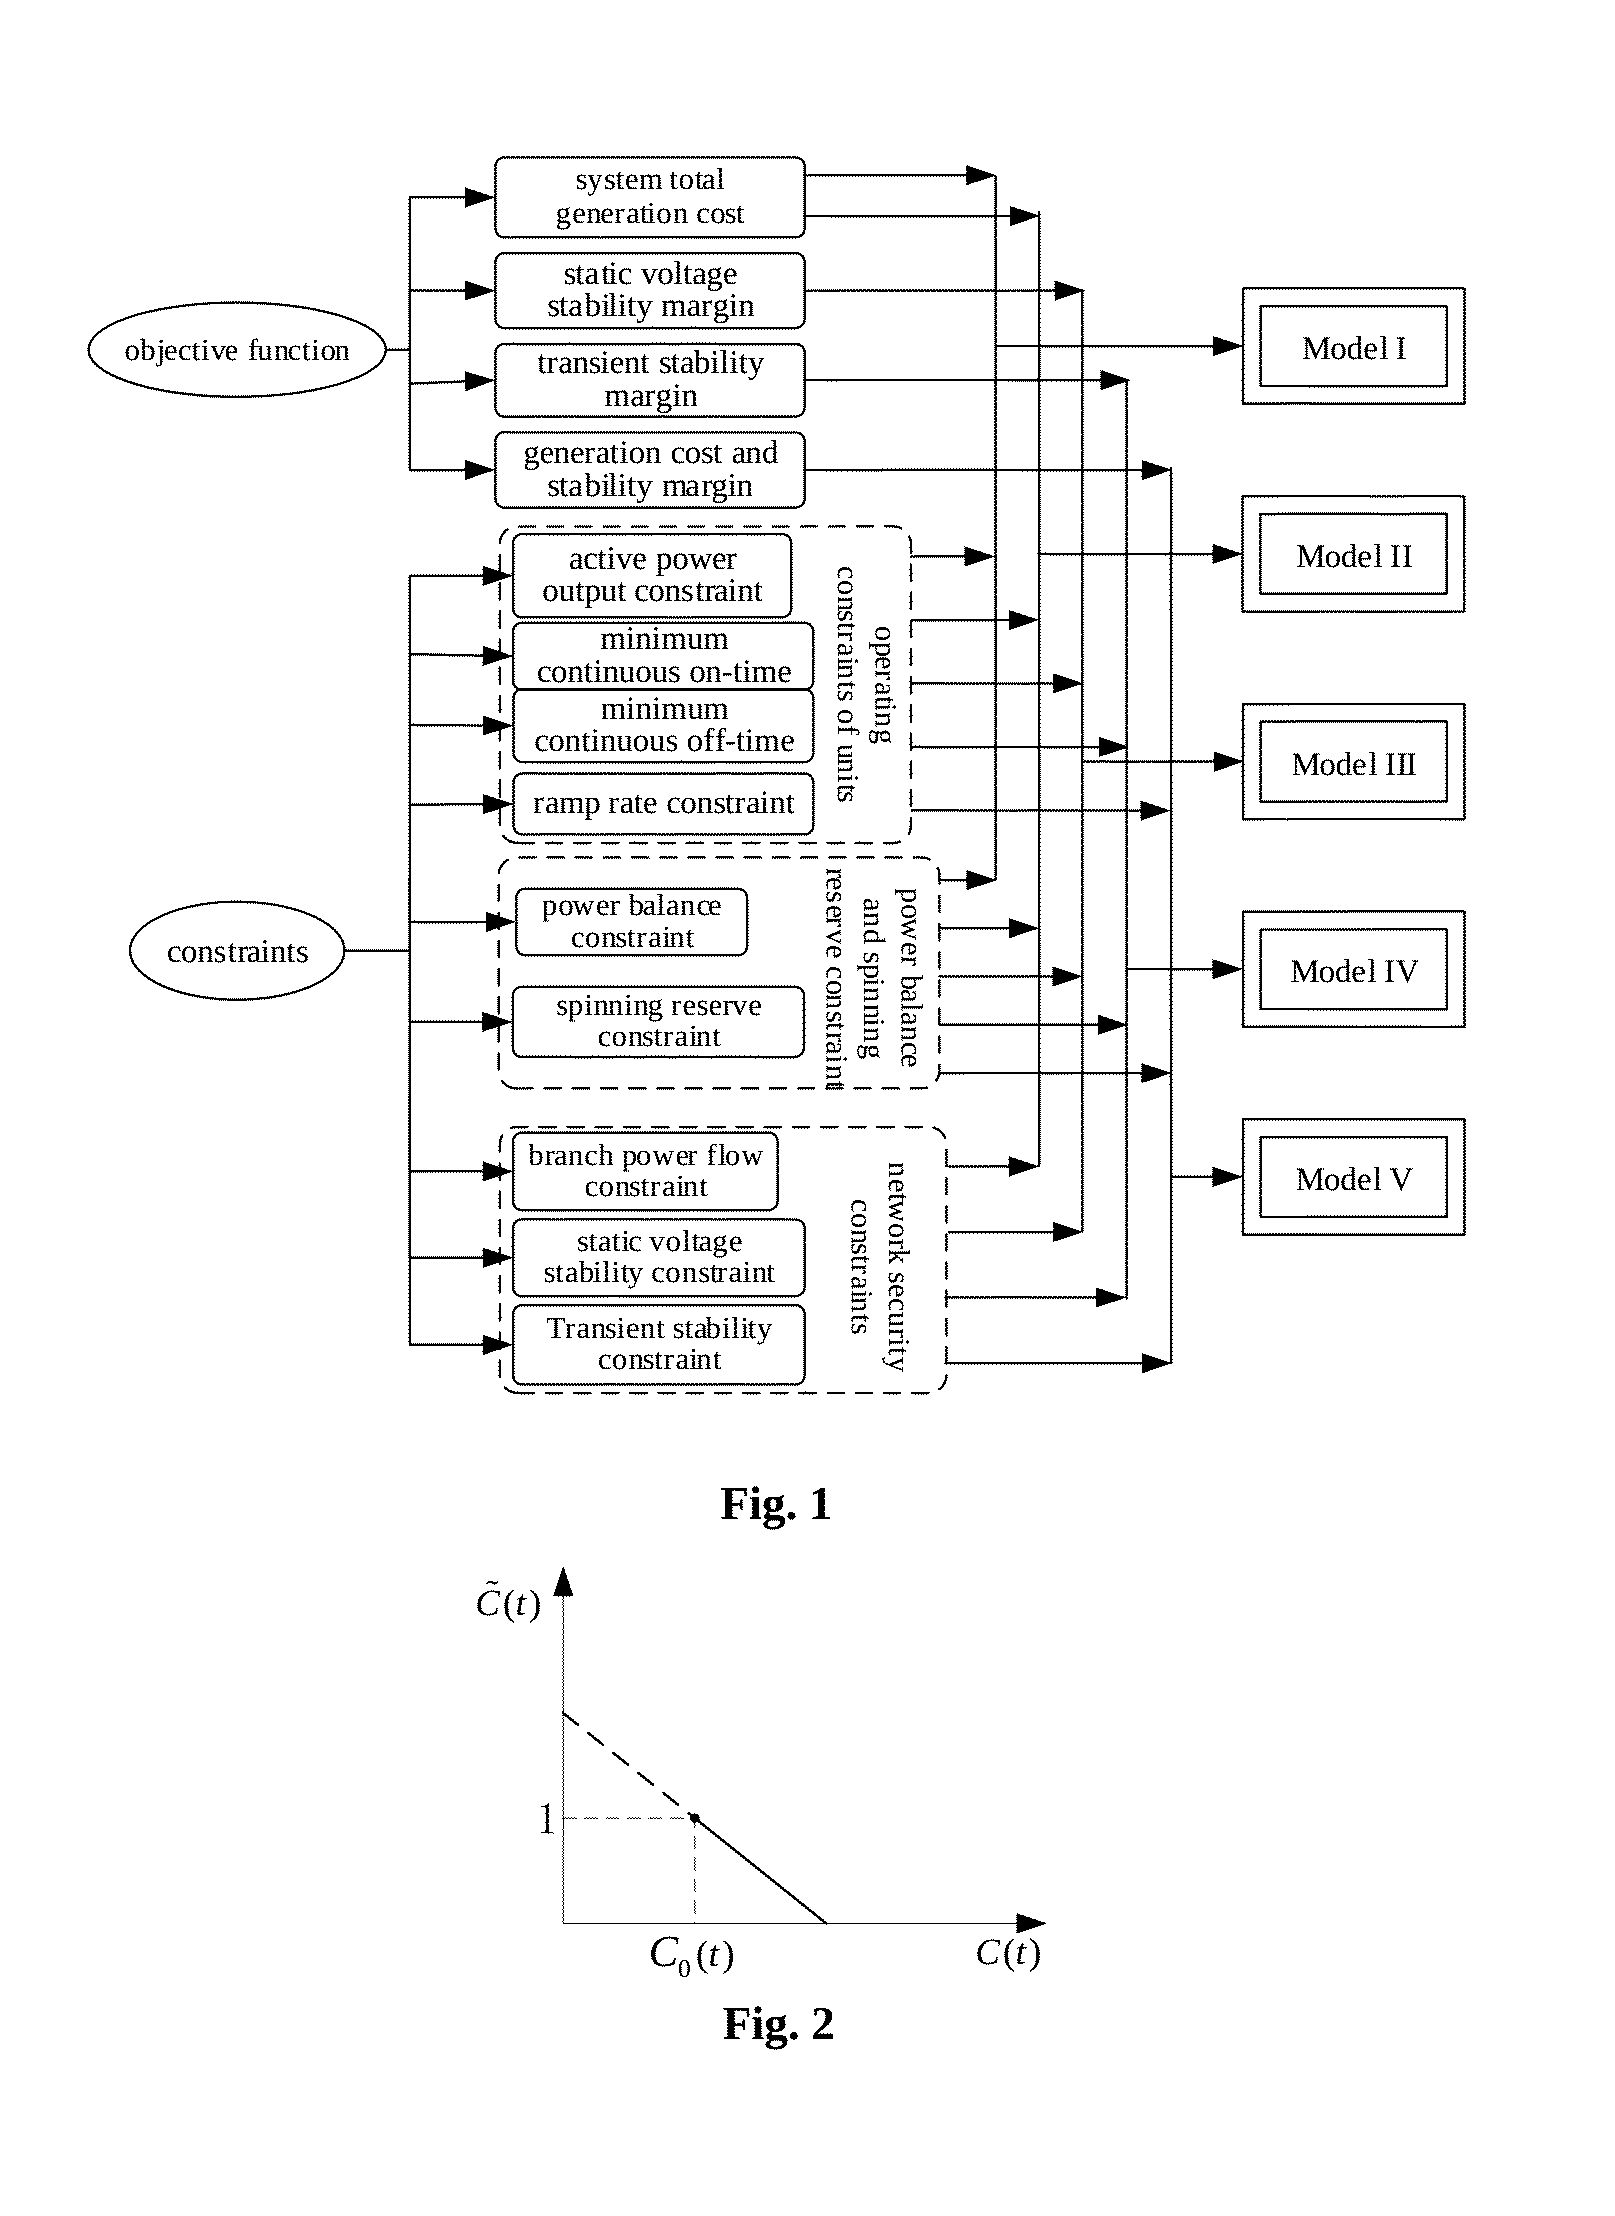 Security region based security-constrained economic dispatching method